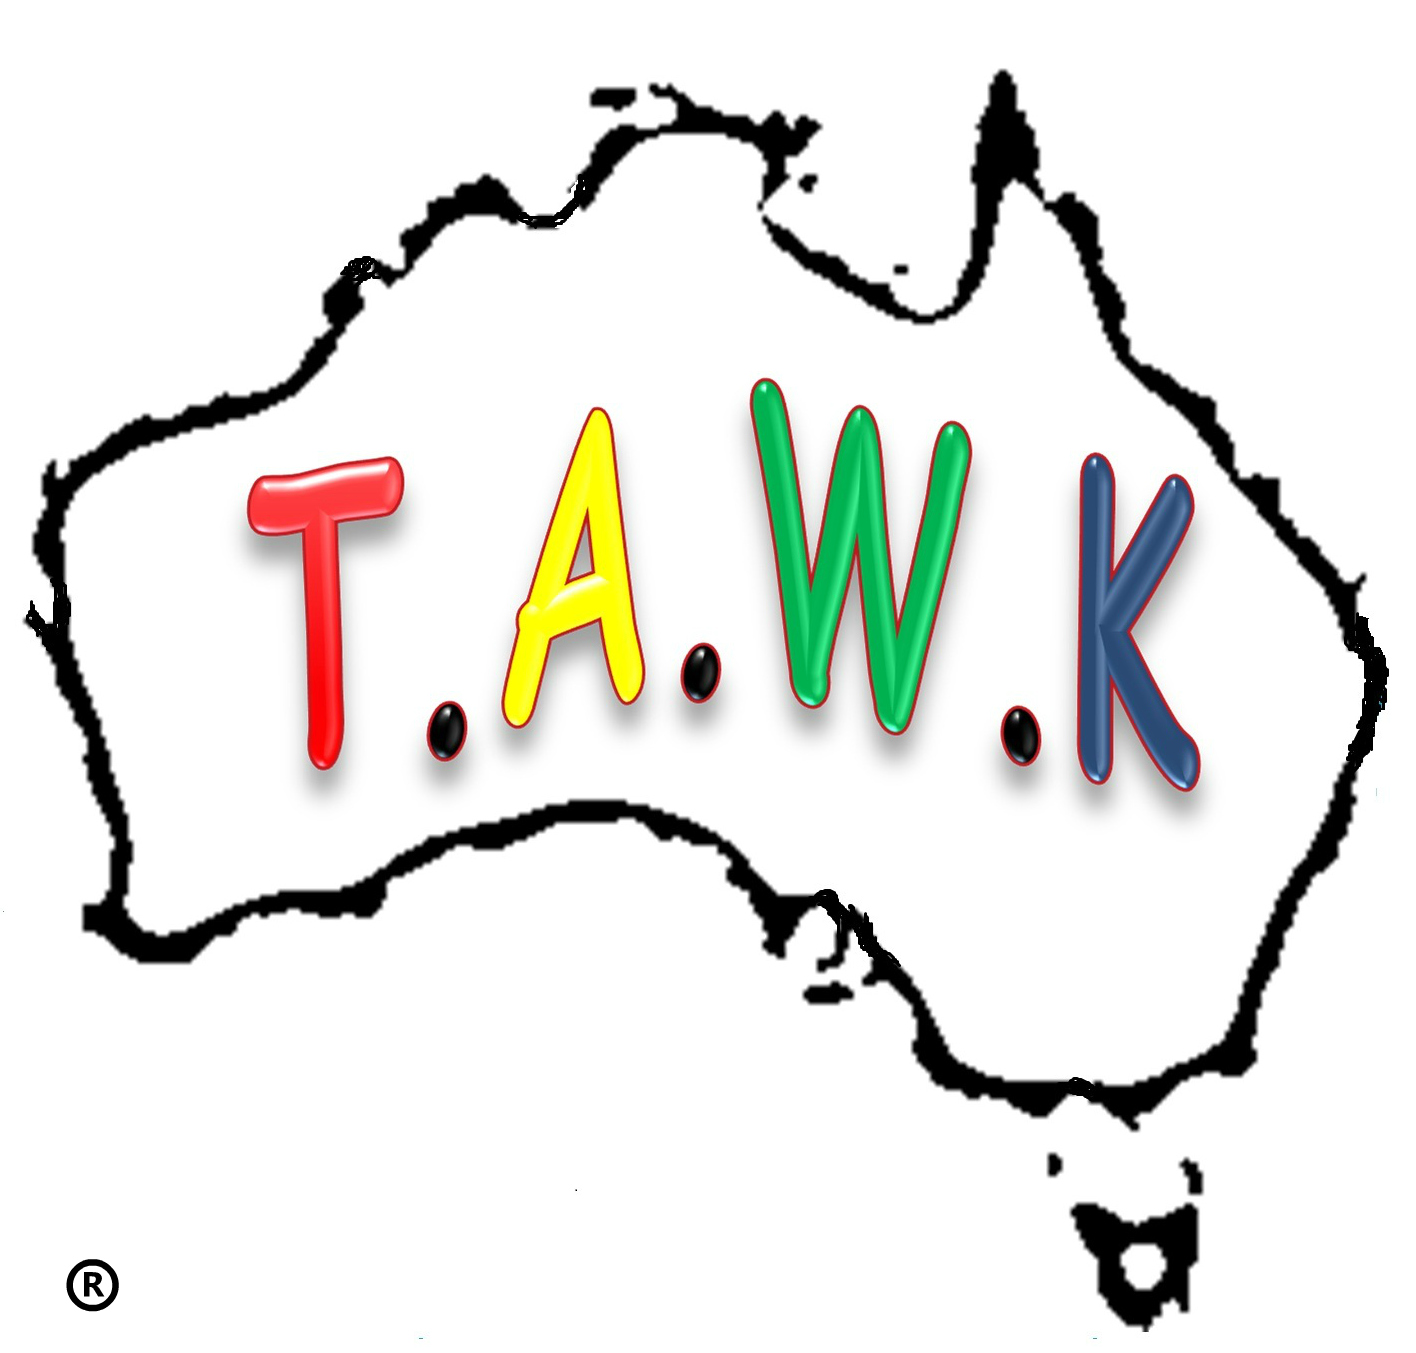 Travelling Australia With Kids (T.A.W.K)